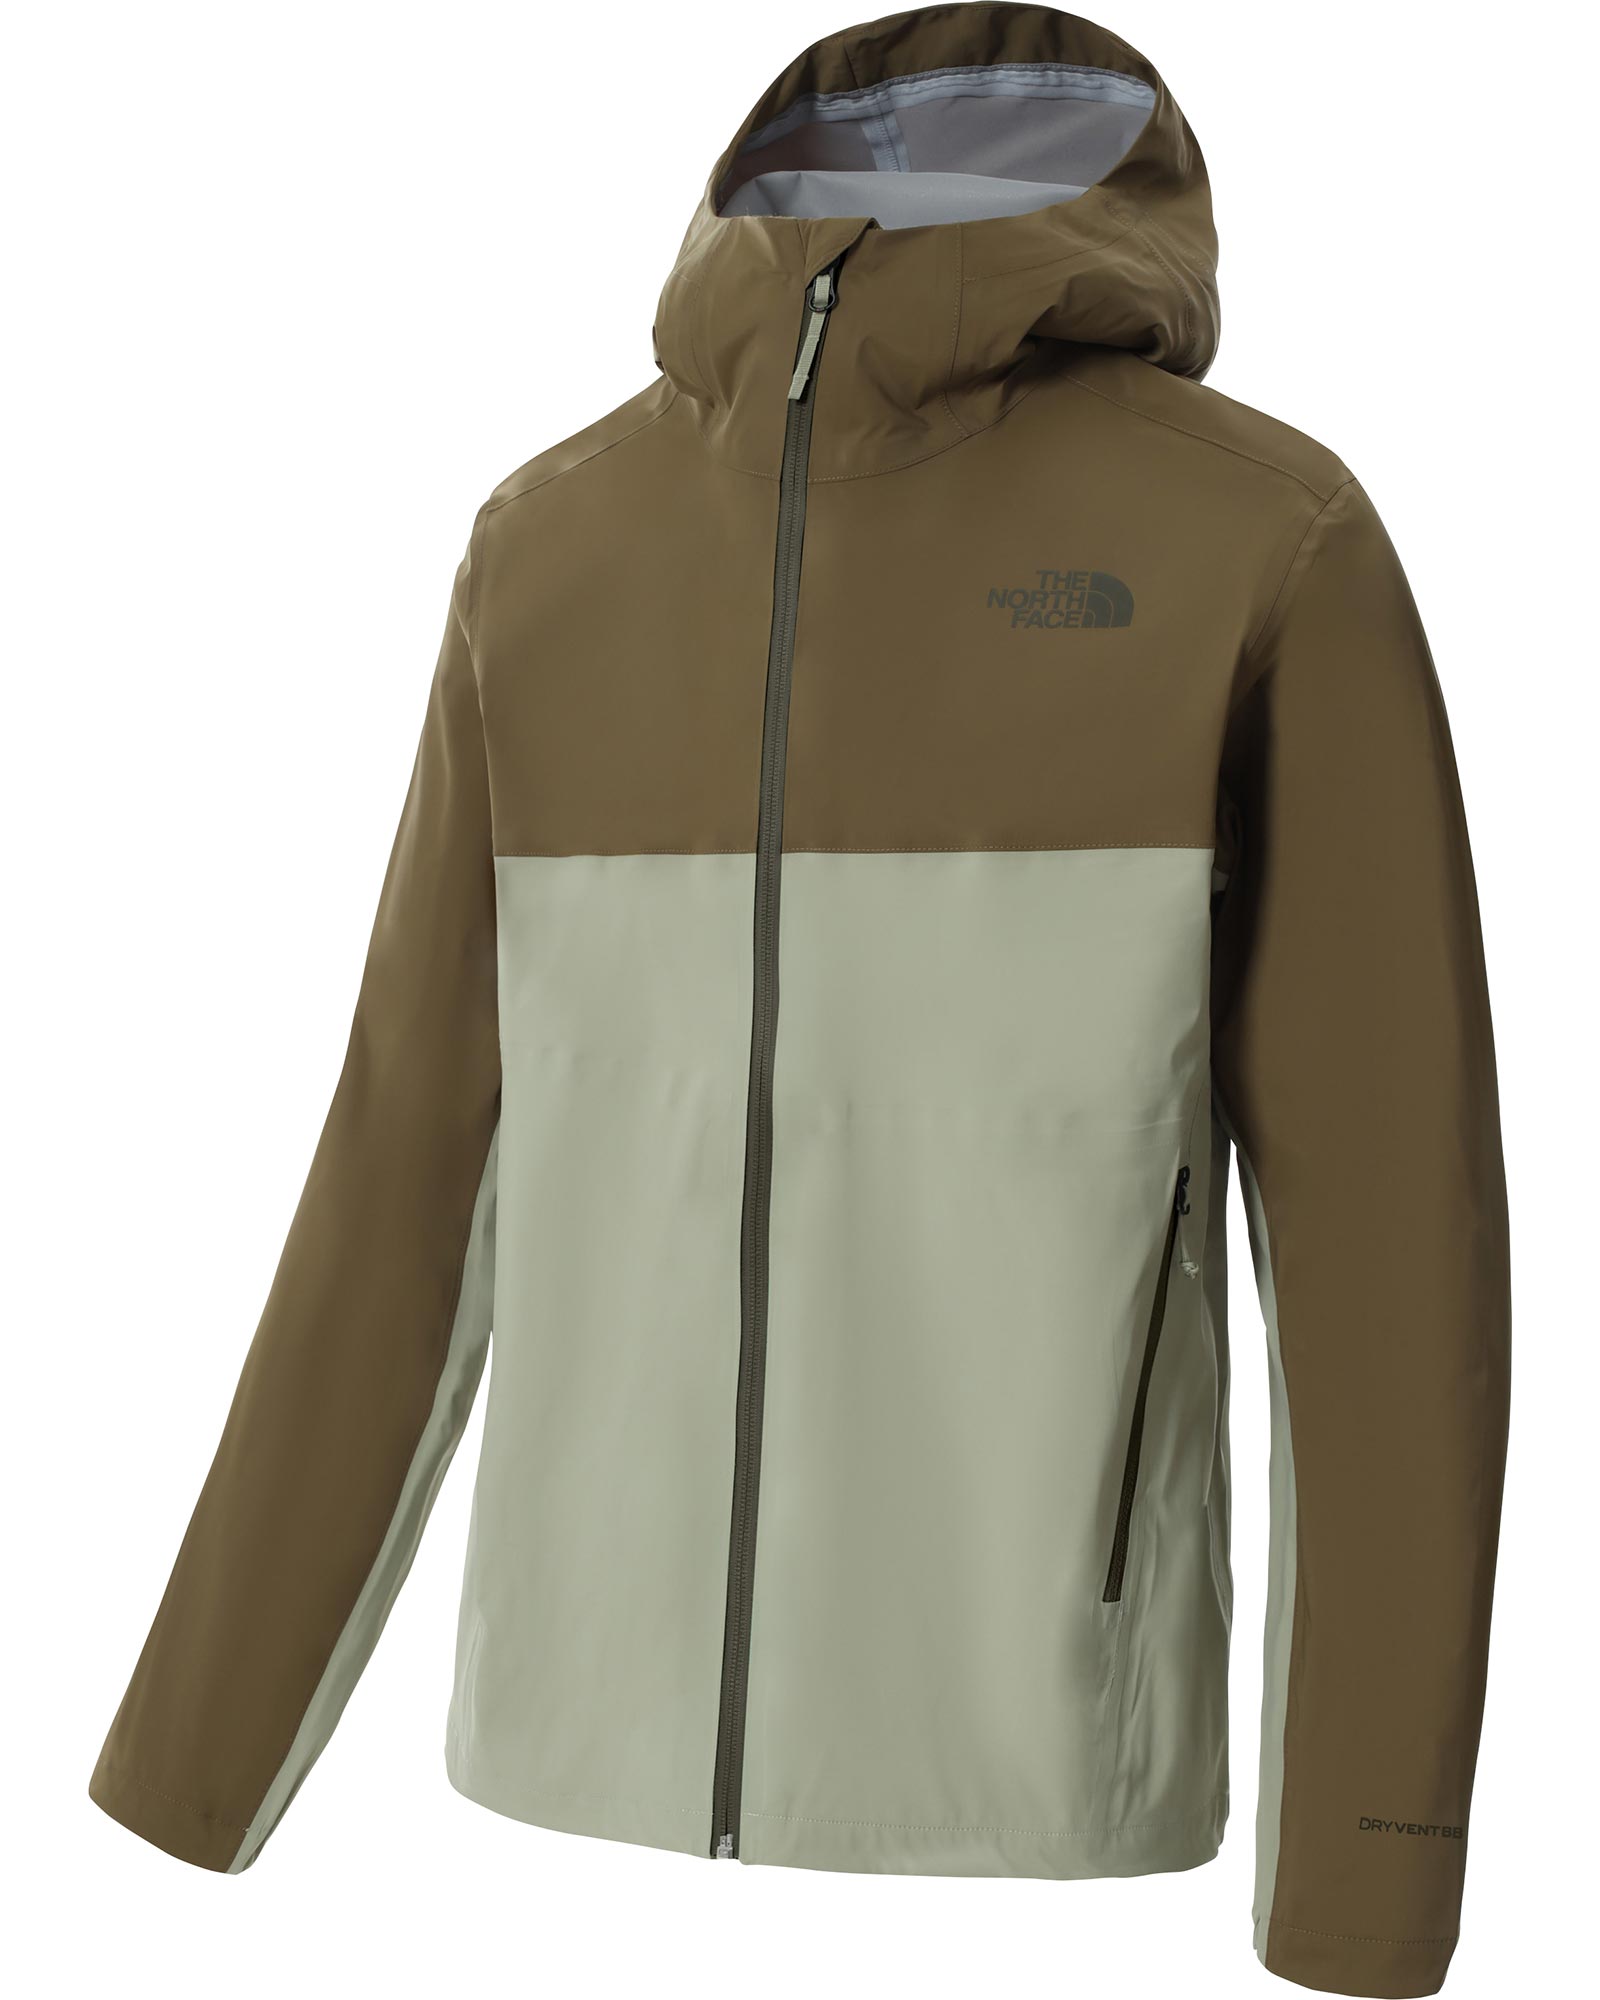 The North Face West Basin DryVent Men’s Jacket - Military Olive S